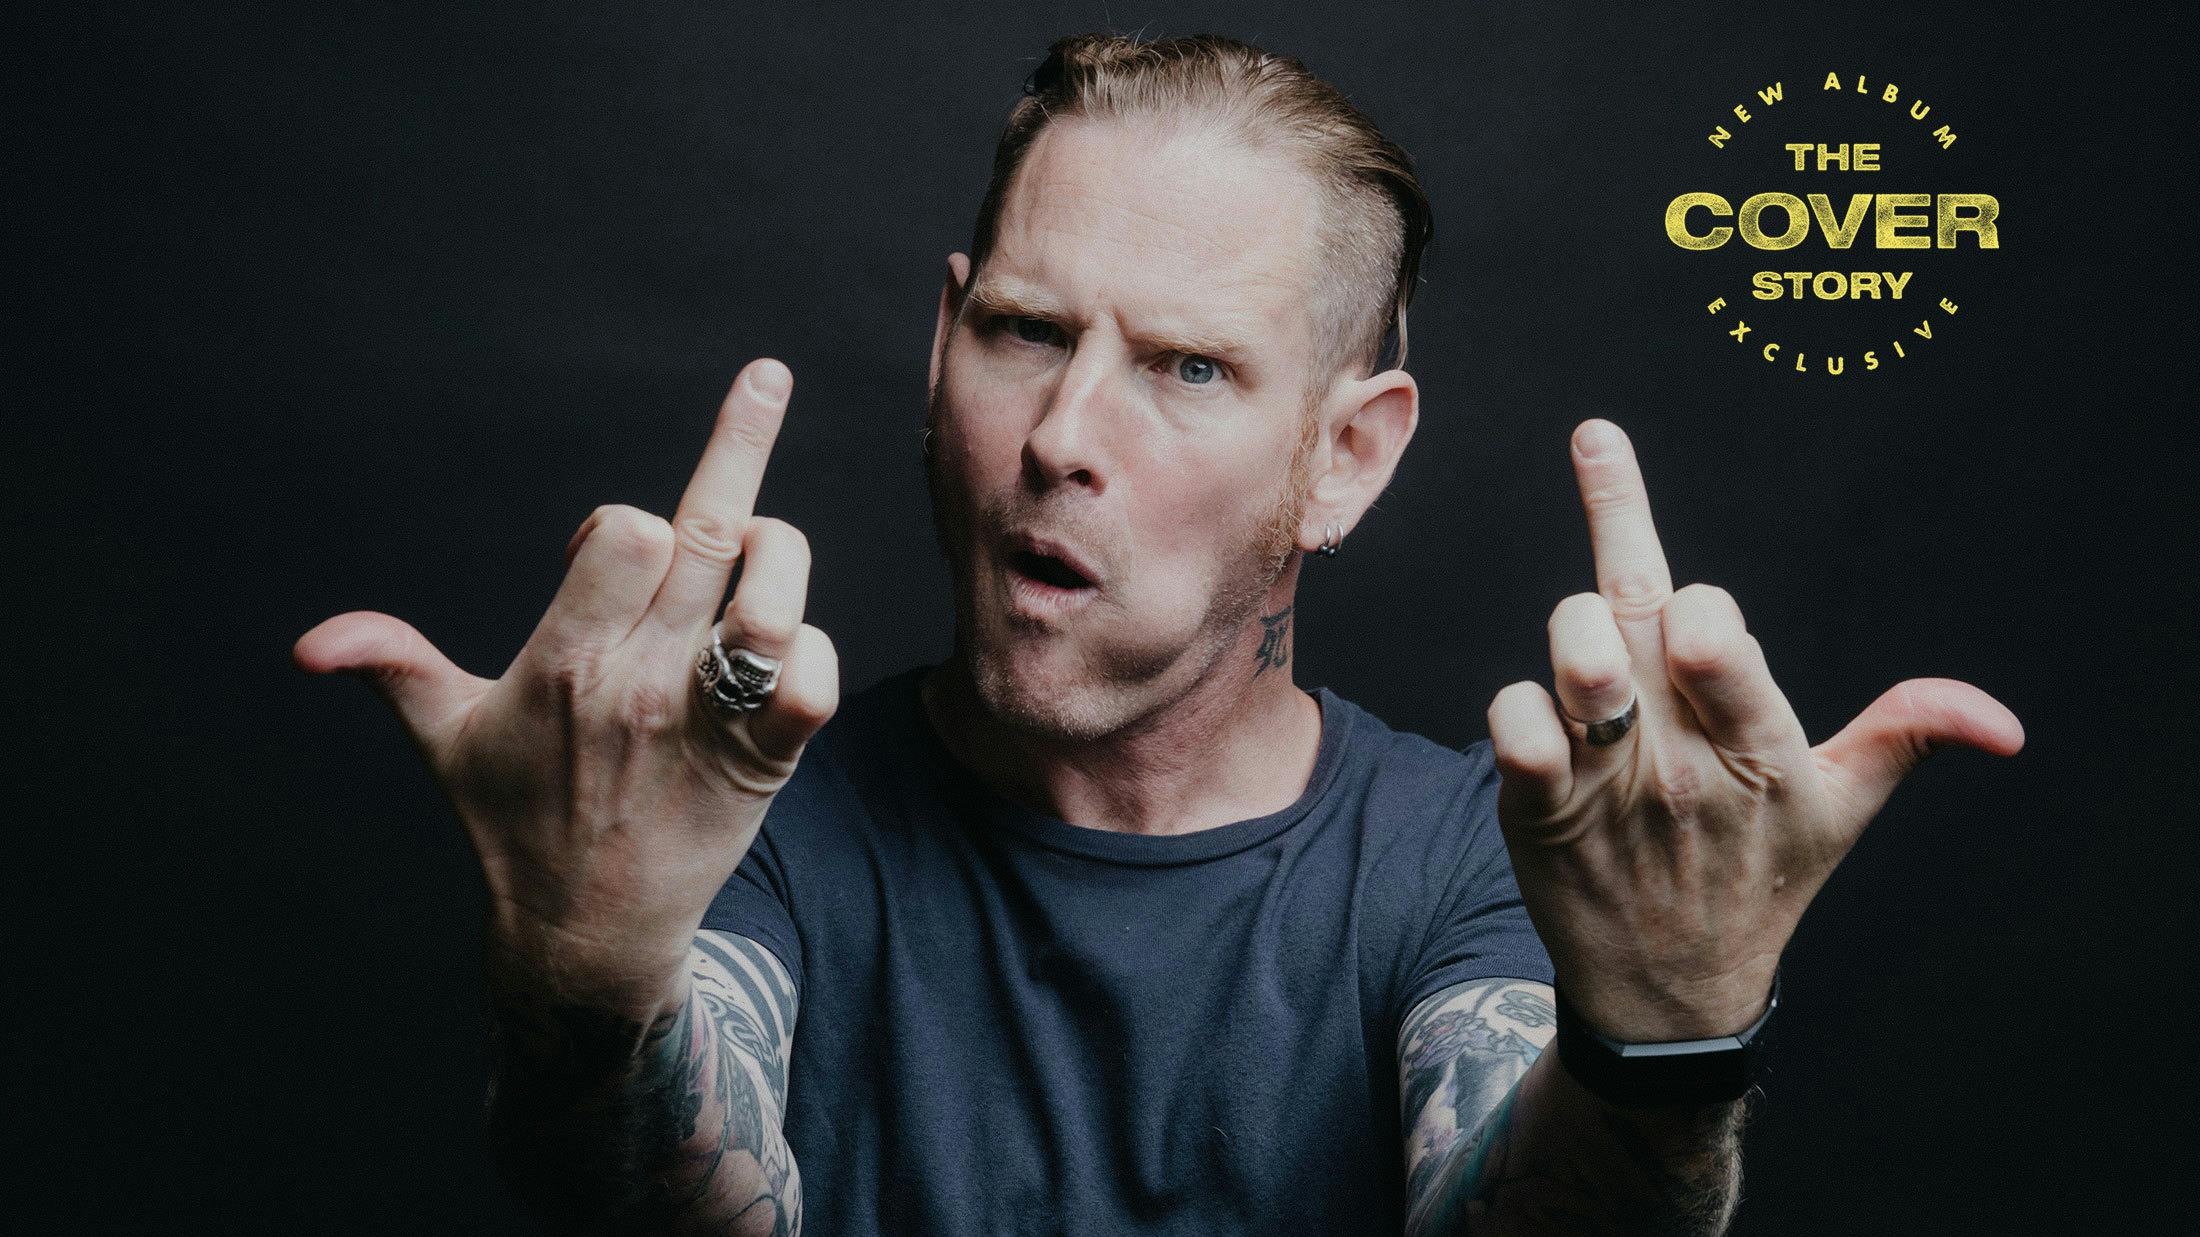 Corey Taylor: "You can’t experience joy unless you know what real sadness feels like"